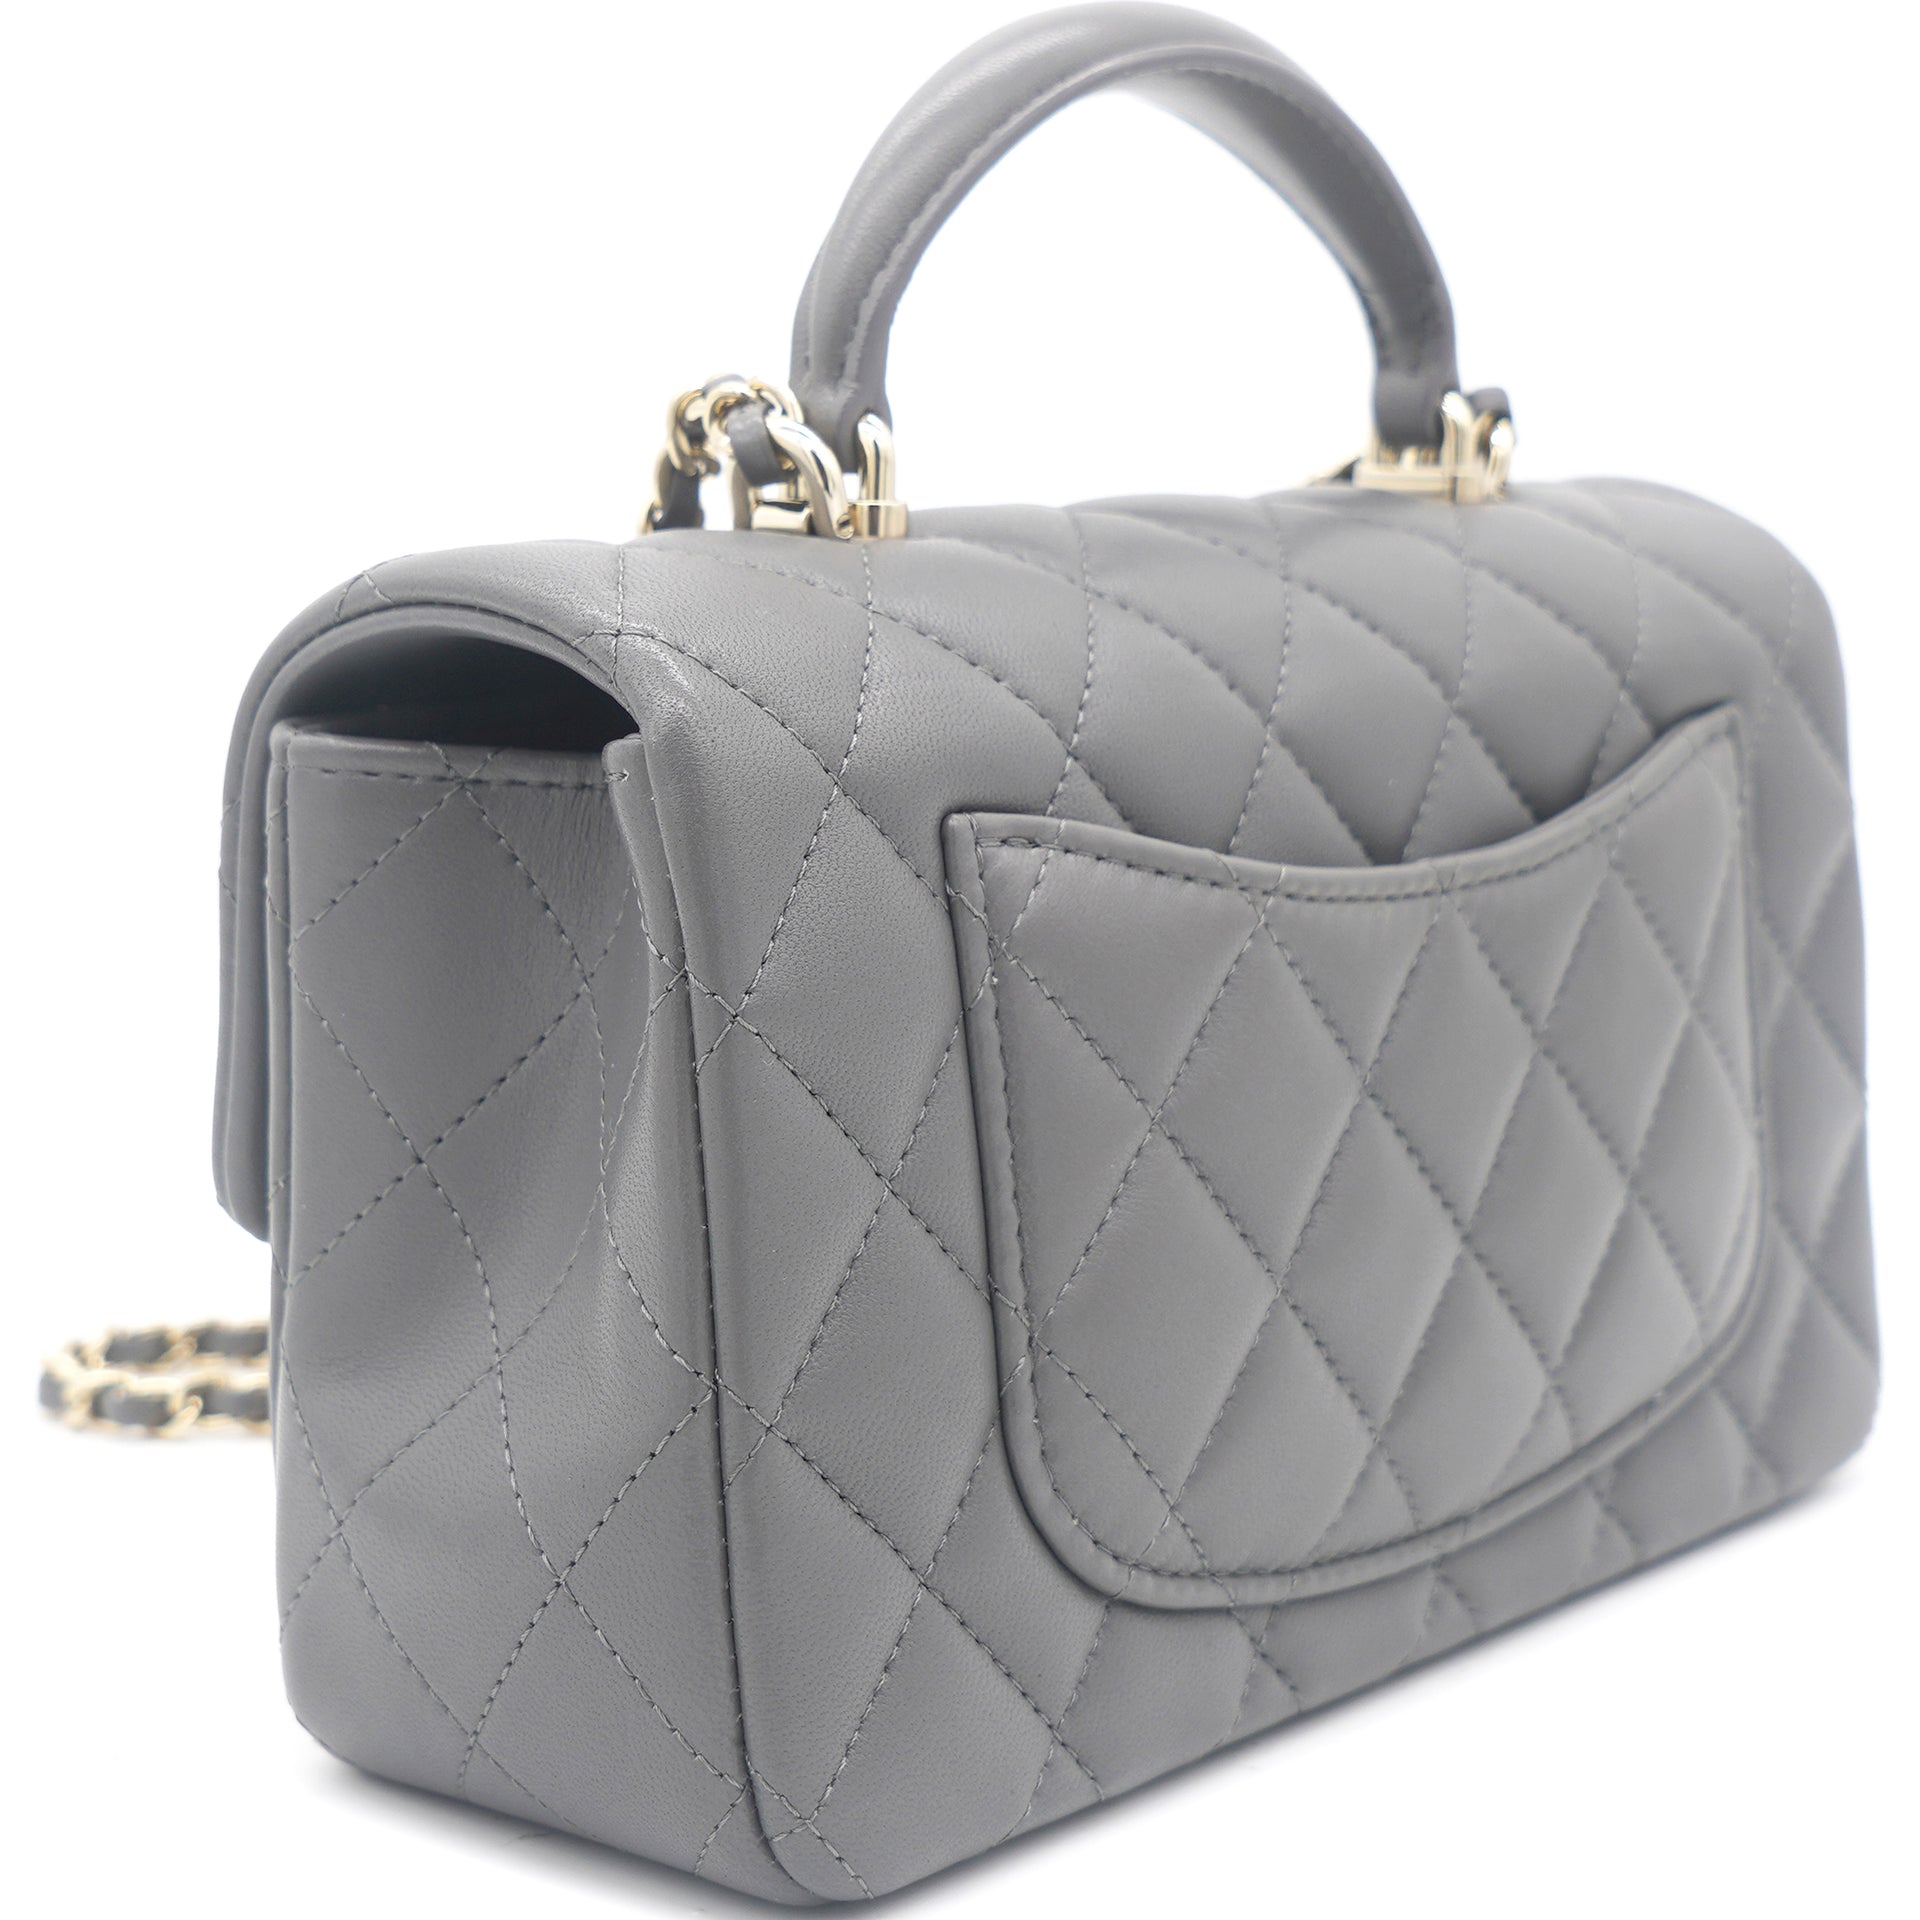 Chanel Green Quilted Lambskin Mini Classic Flap Bag ○ Labellov